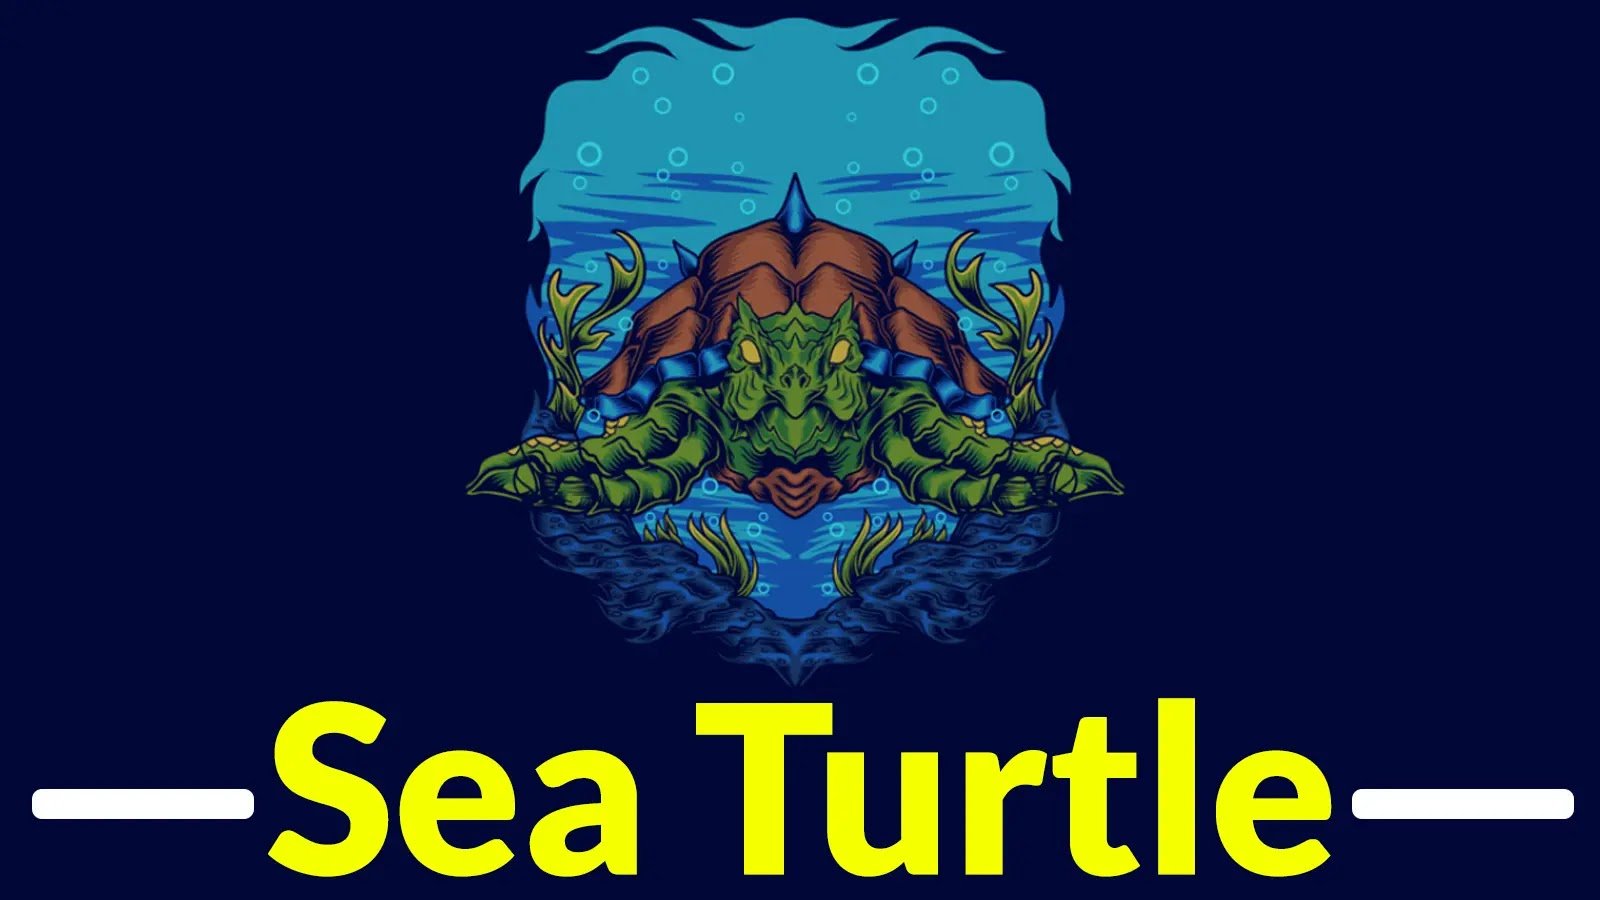 Sea Turtle APT Group Exploiting Known Vulnerabilities to Attack IT-service Providers